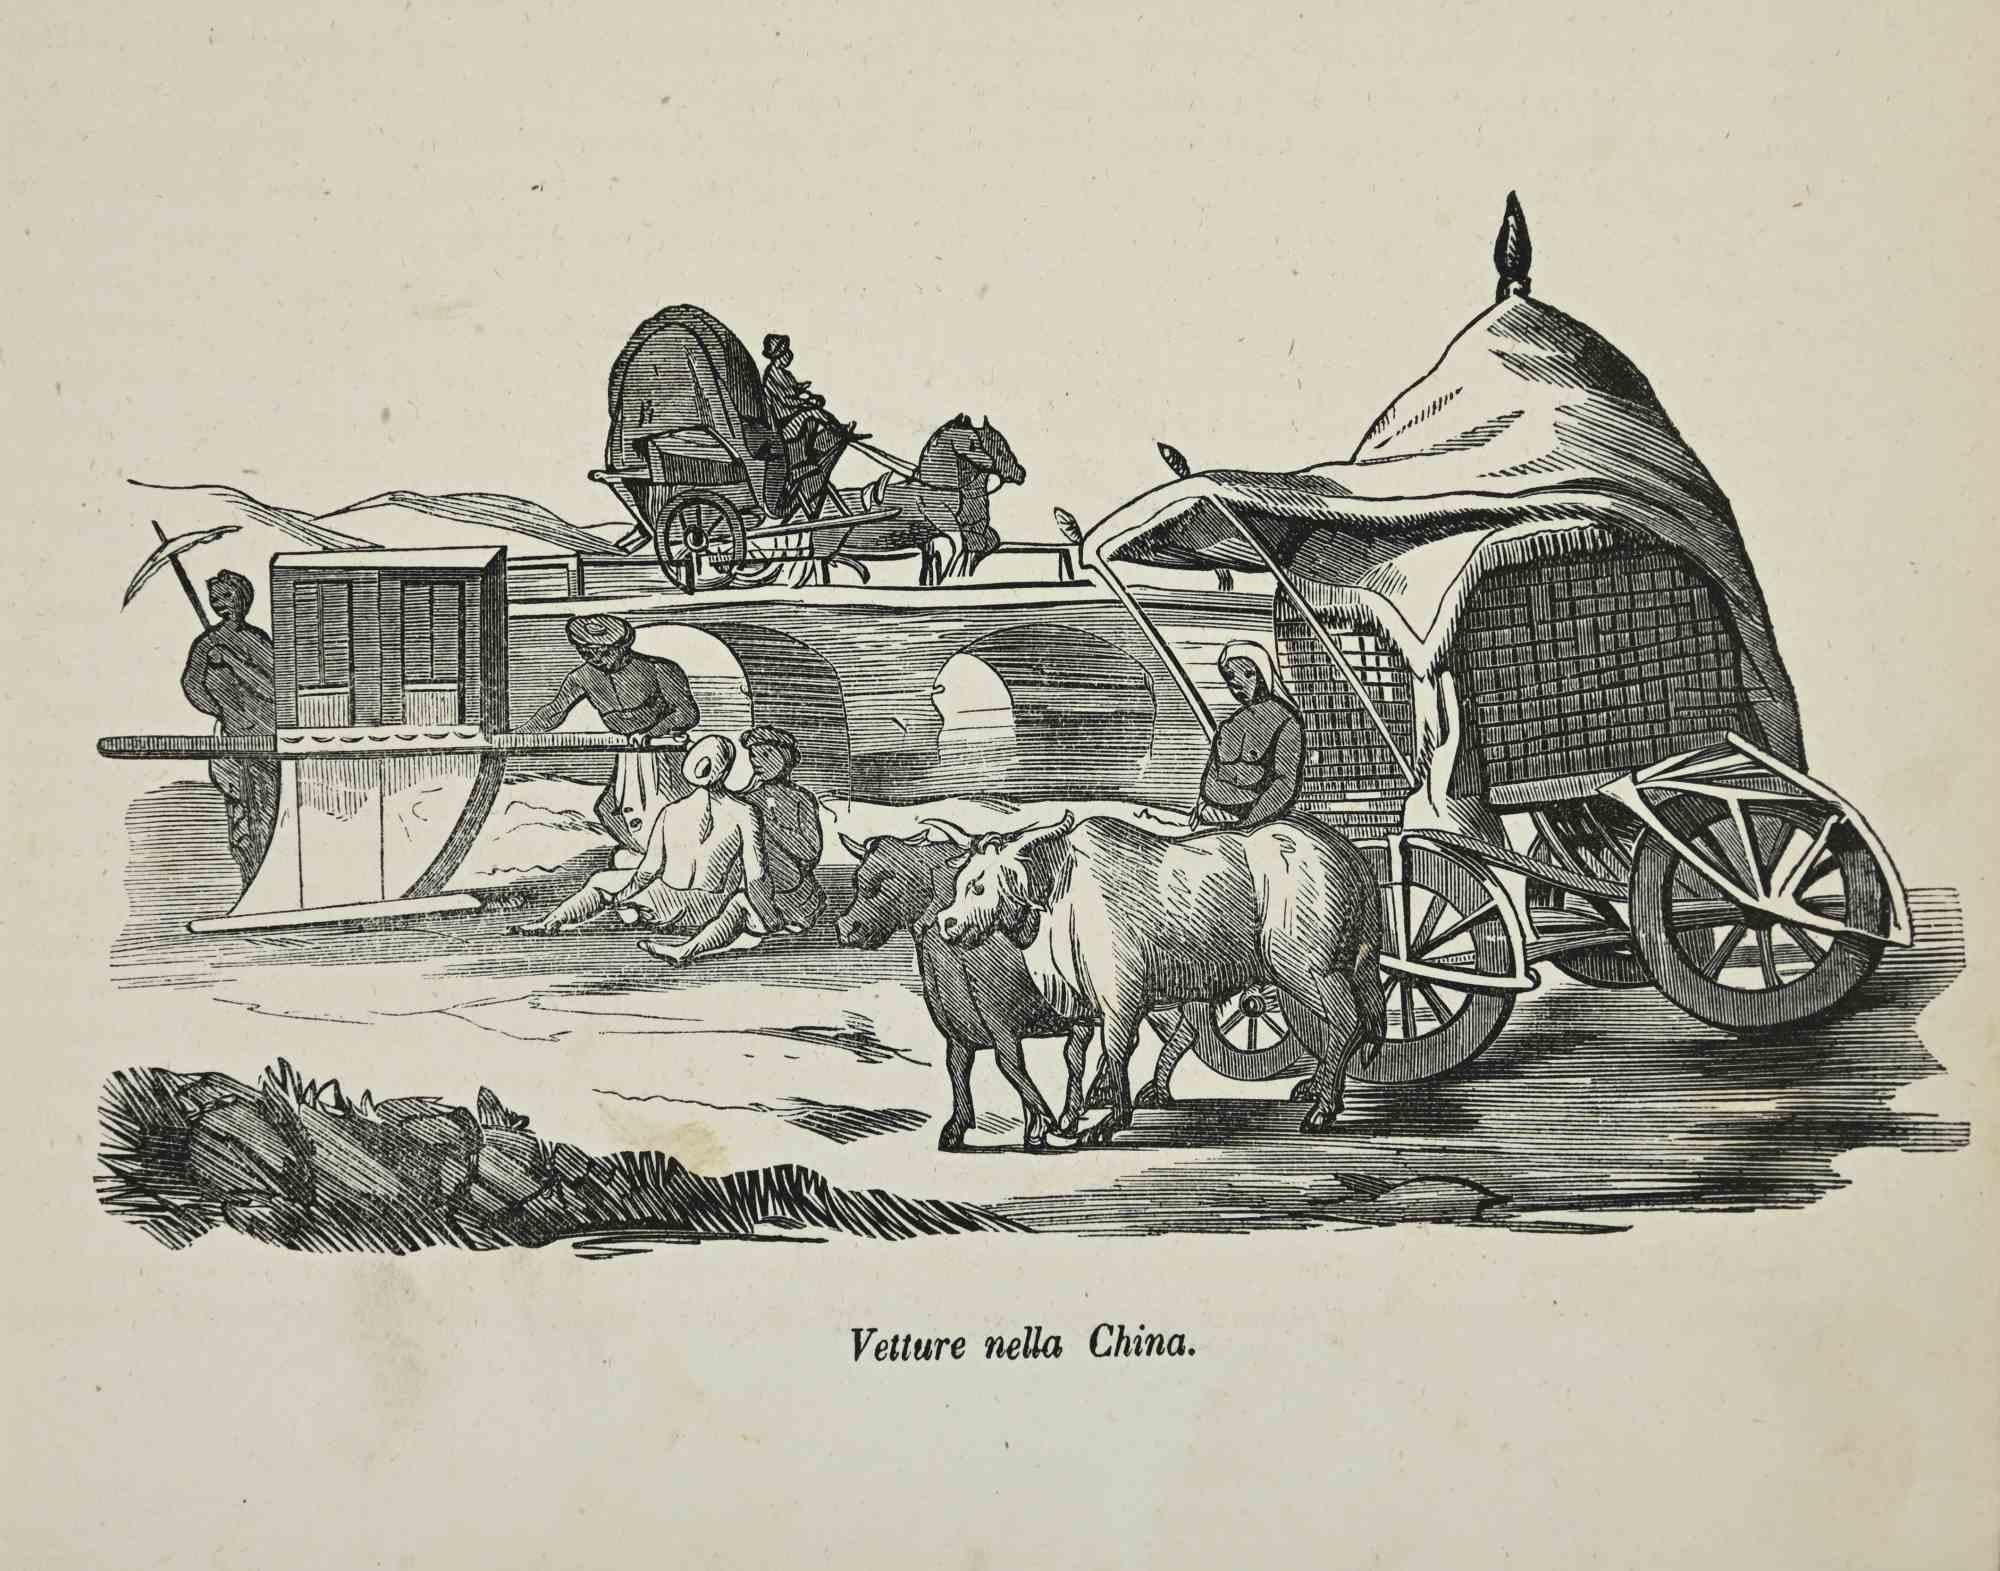 Various Artists Figurative Print - Chariot in China - Lithograph - 1862